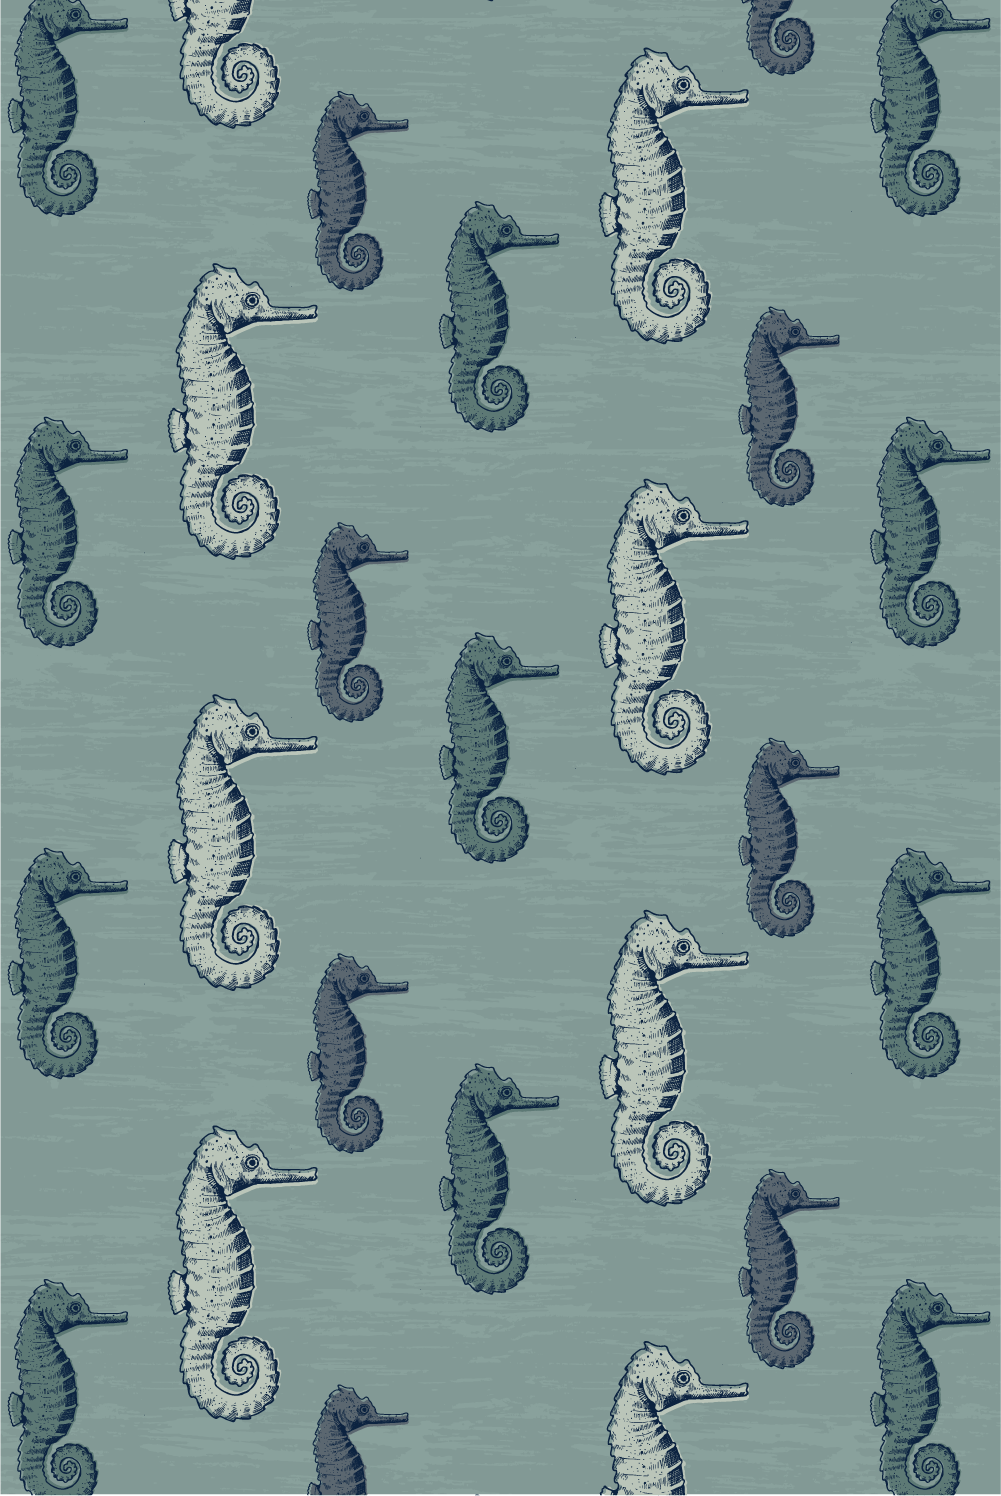 Pattern design by Sophie Leven of an endangered seahorse species. Digital illustrations consist of dark blue linework coloured with a spectrum of blues and teals, on a textural blue background.